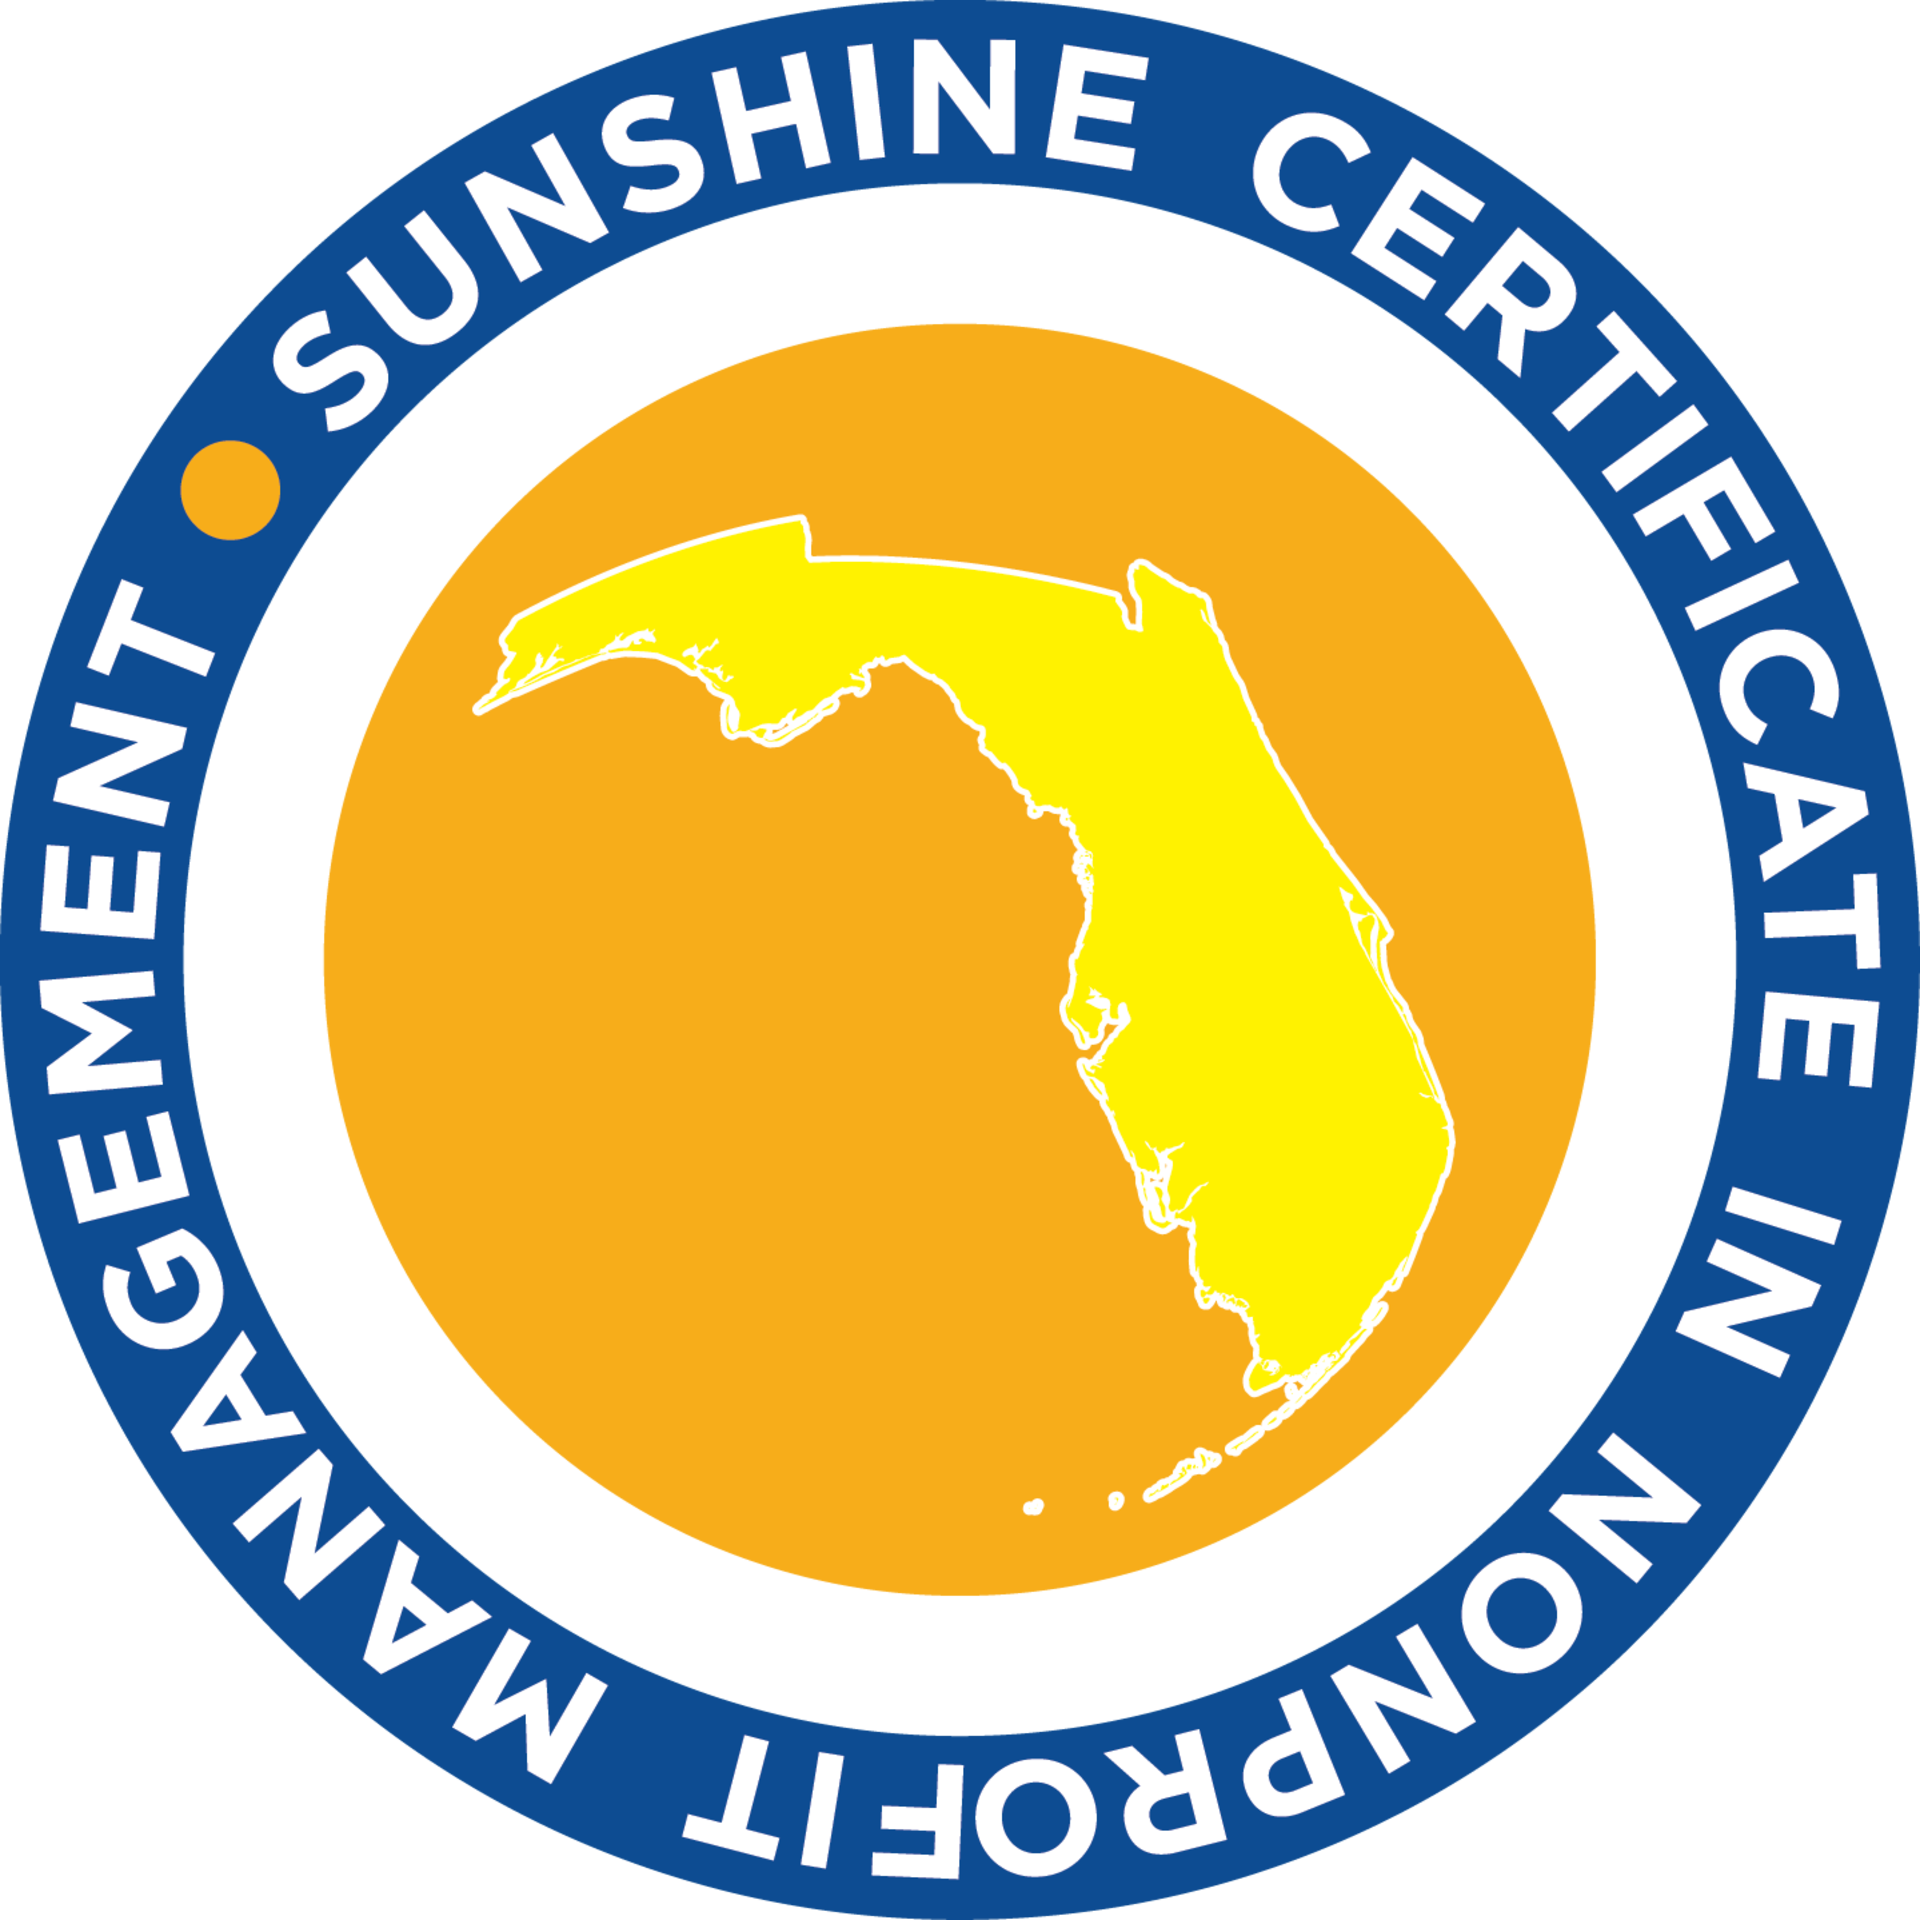  Florida Nonprofits’ Marketing & Special Events Class of the Sunshine Certificate....